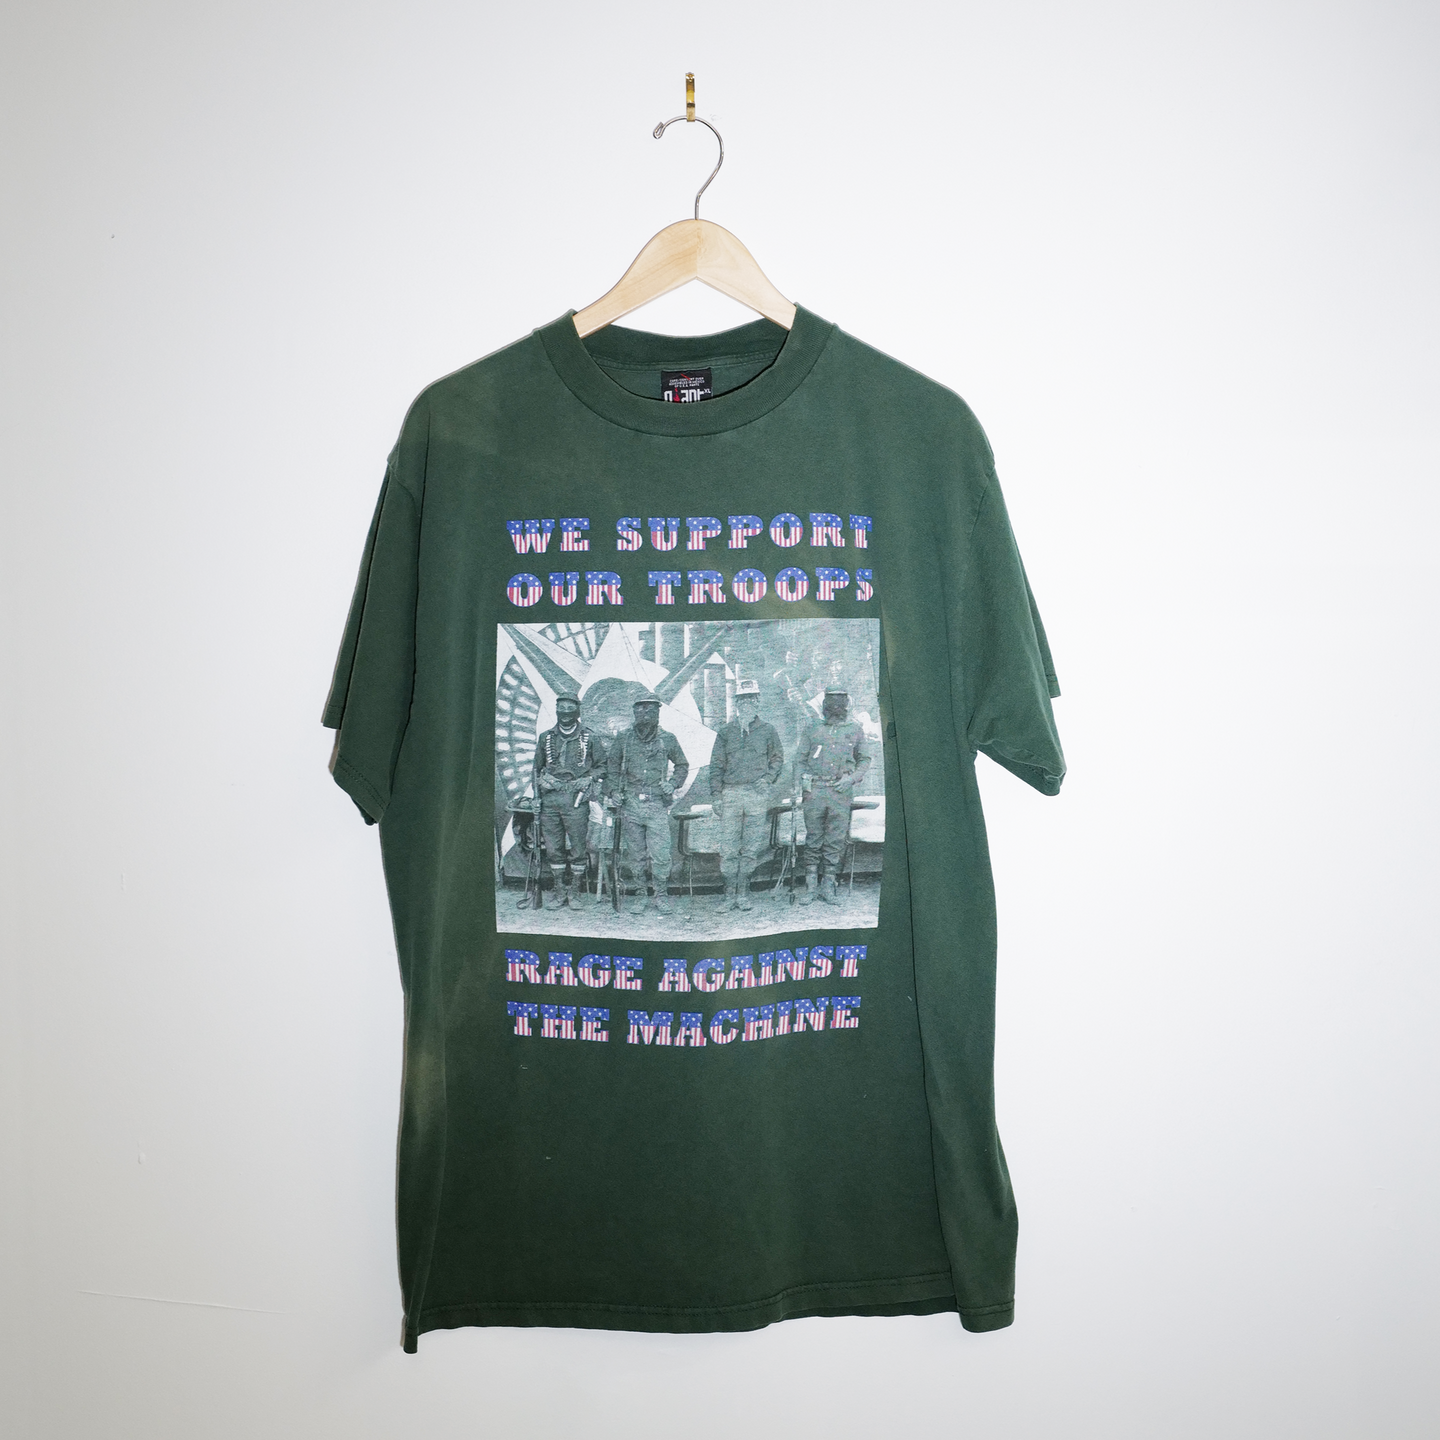 90s Rage Against The Machines “We Support our Troops” Tee